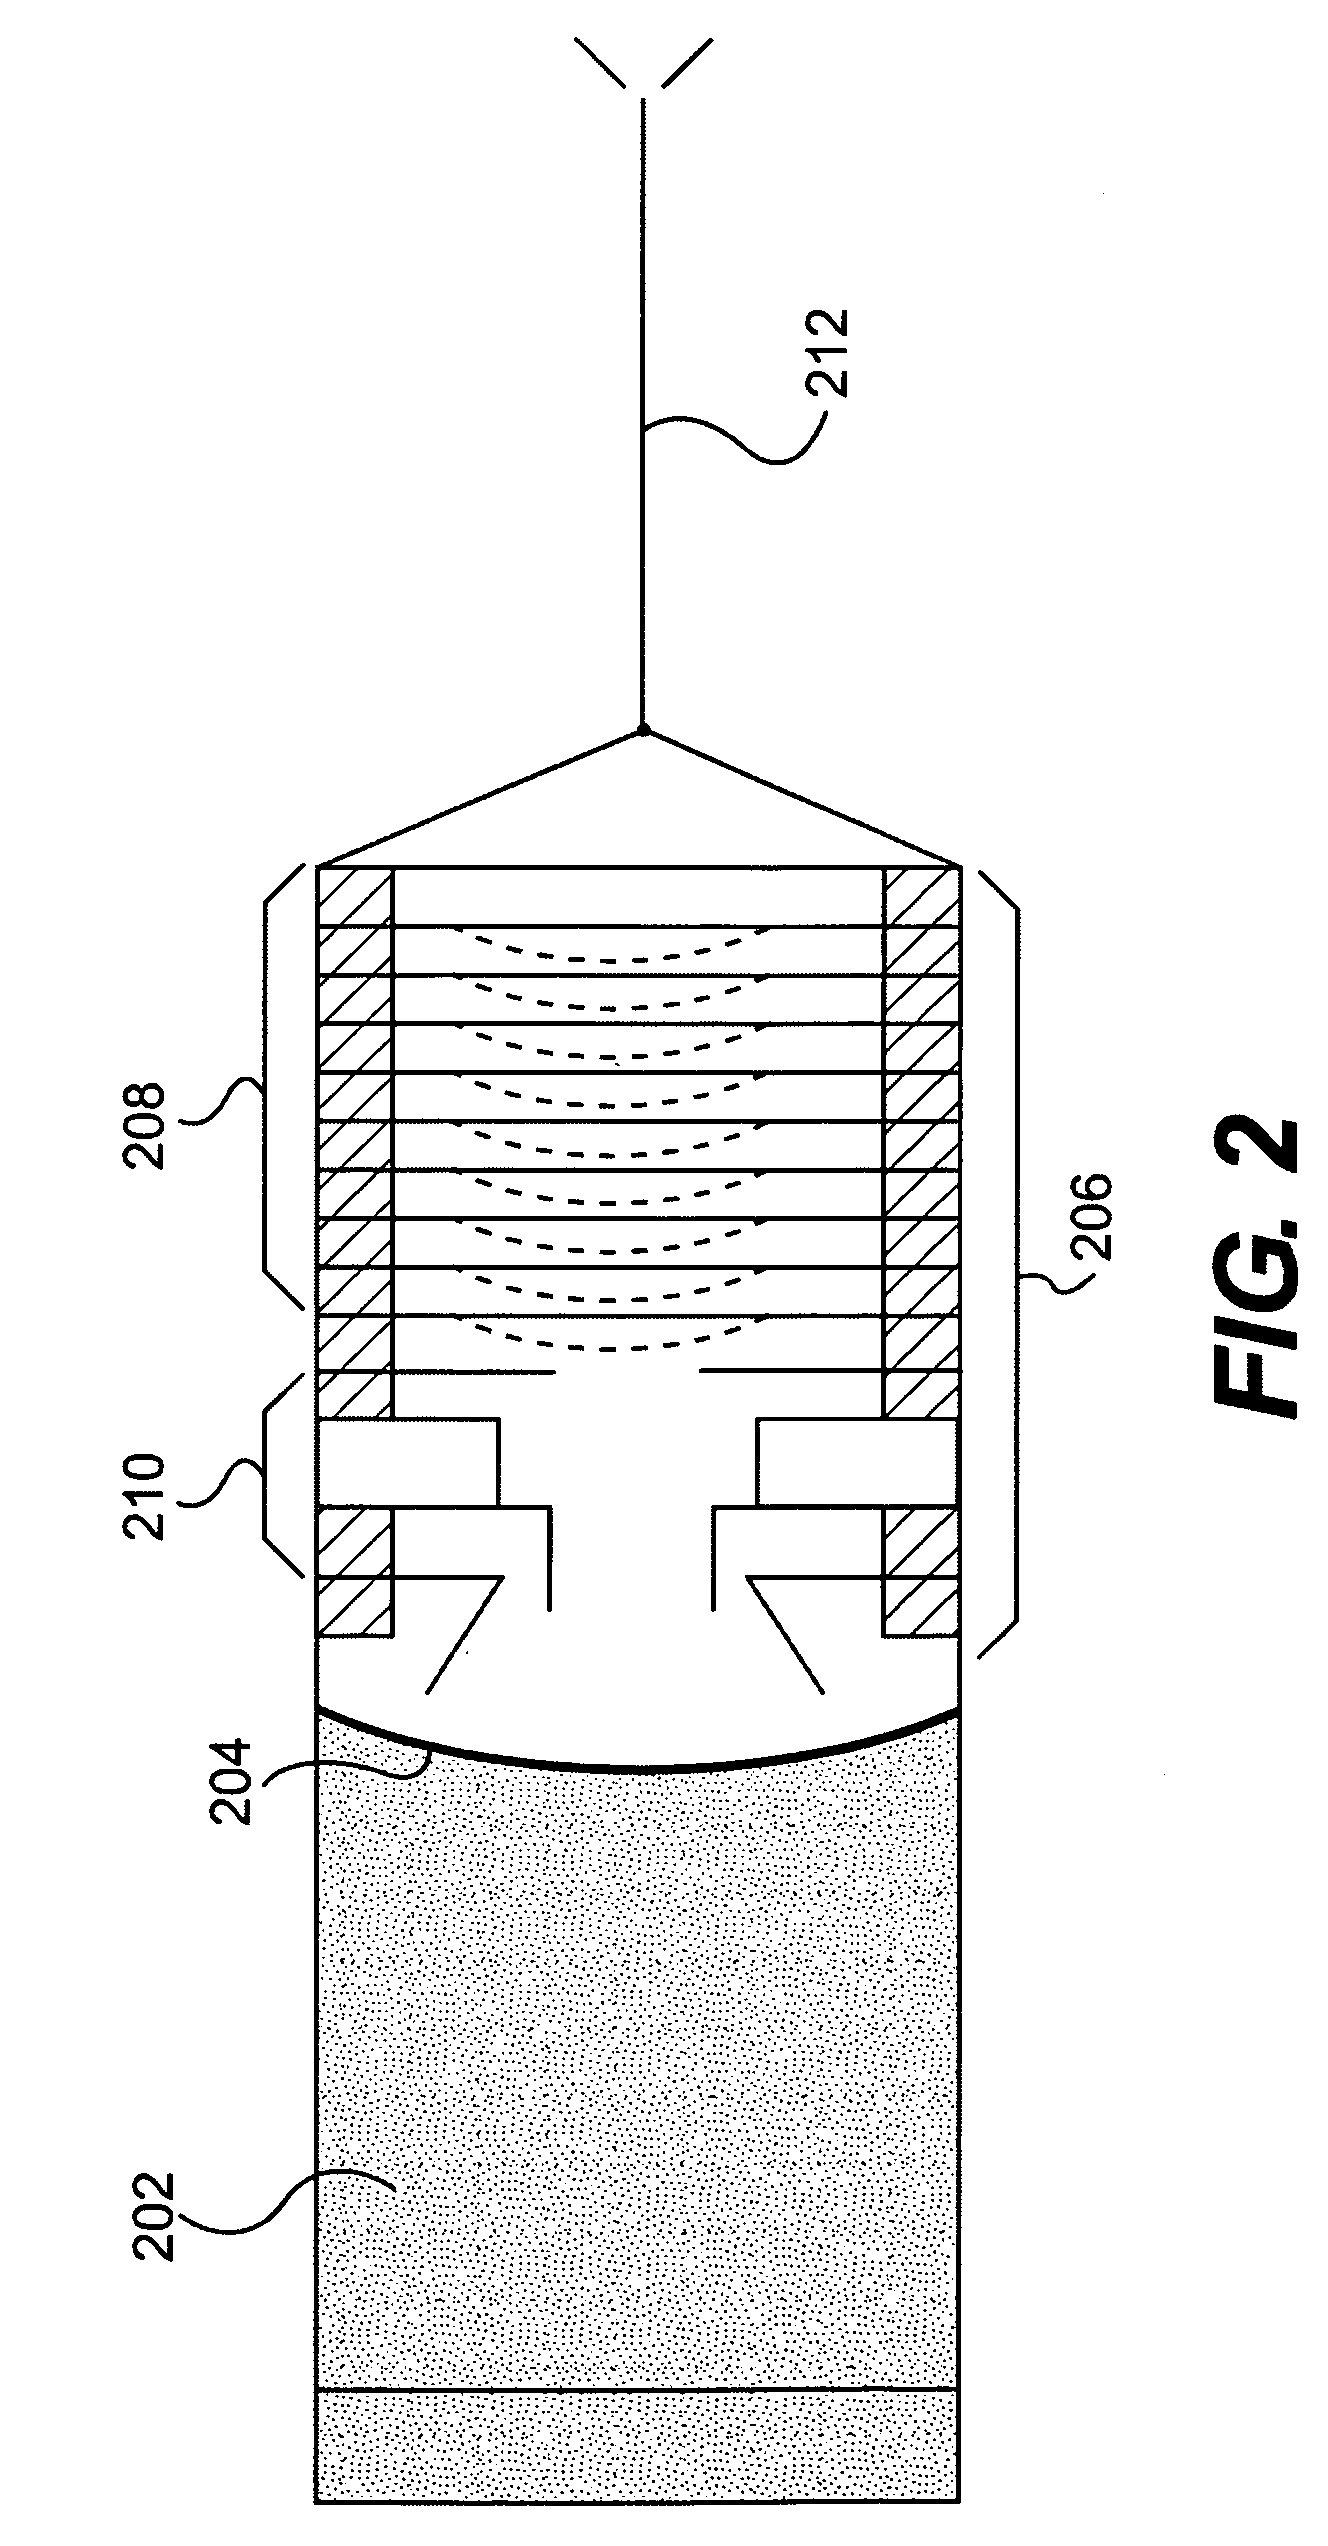 Method and apparatus for radiation detection in a high temperature environment